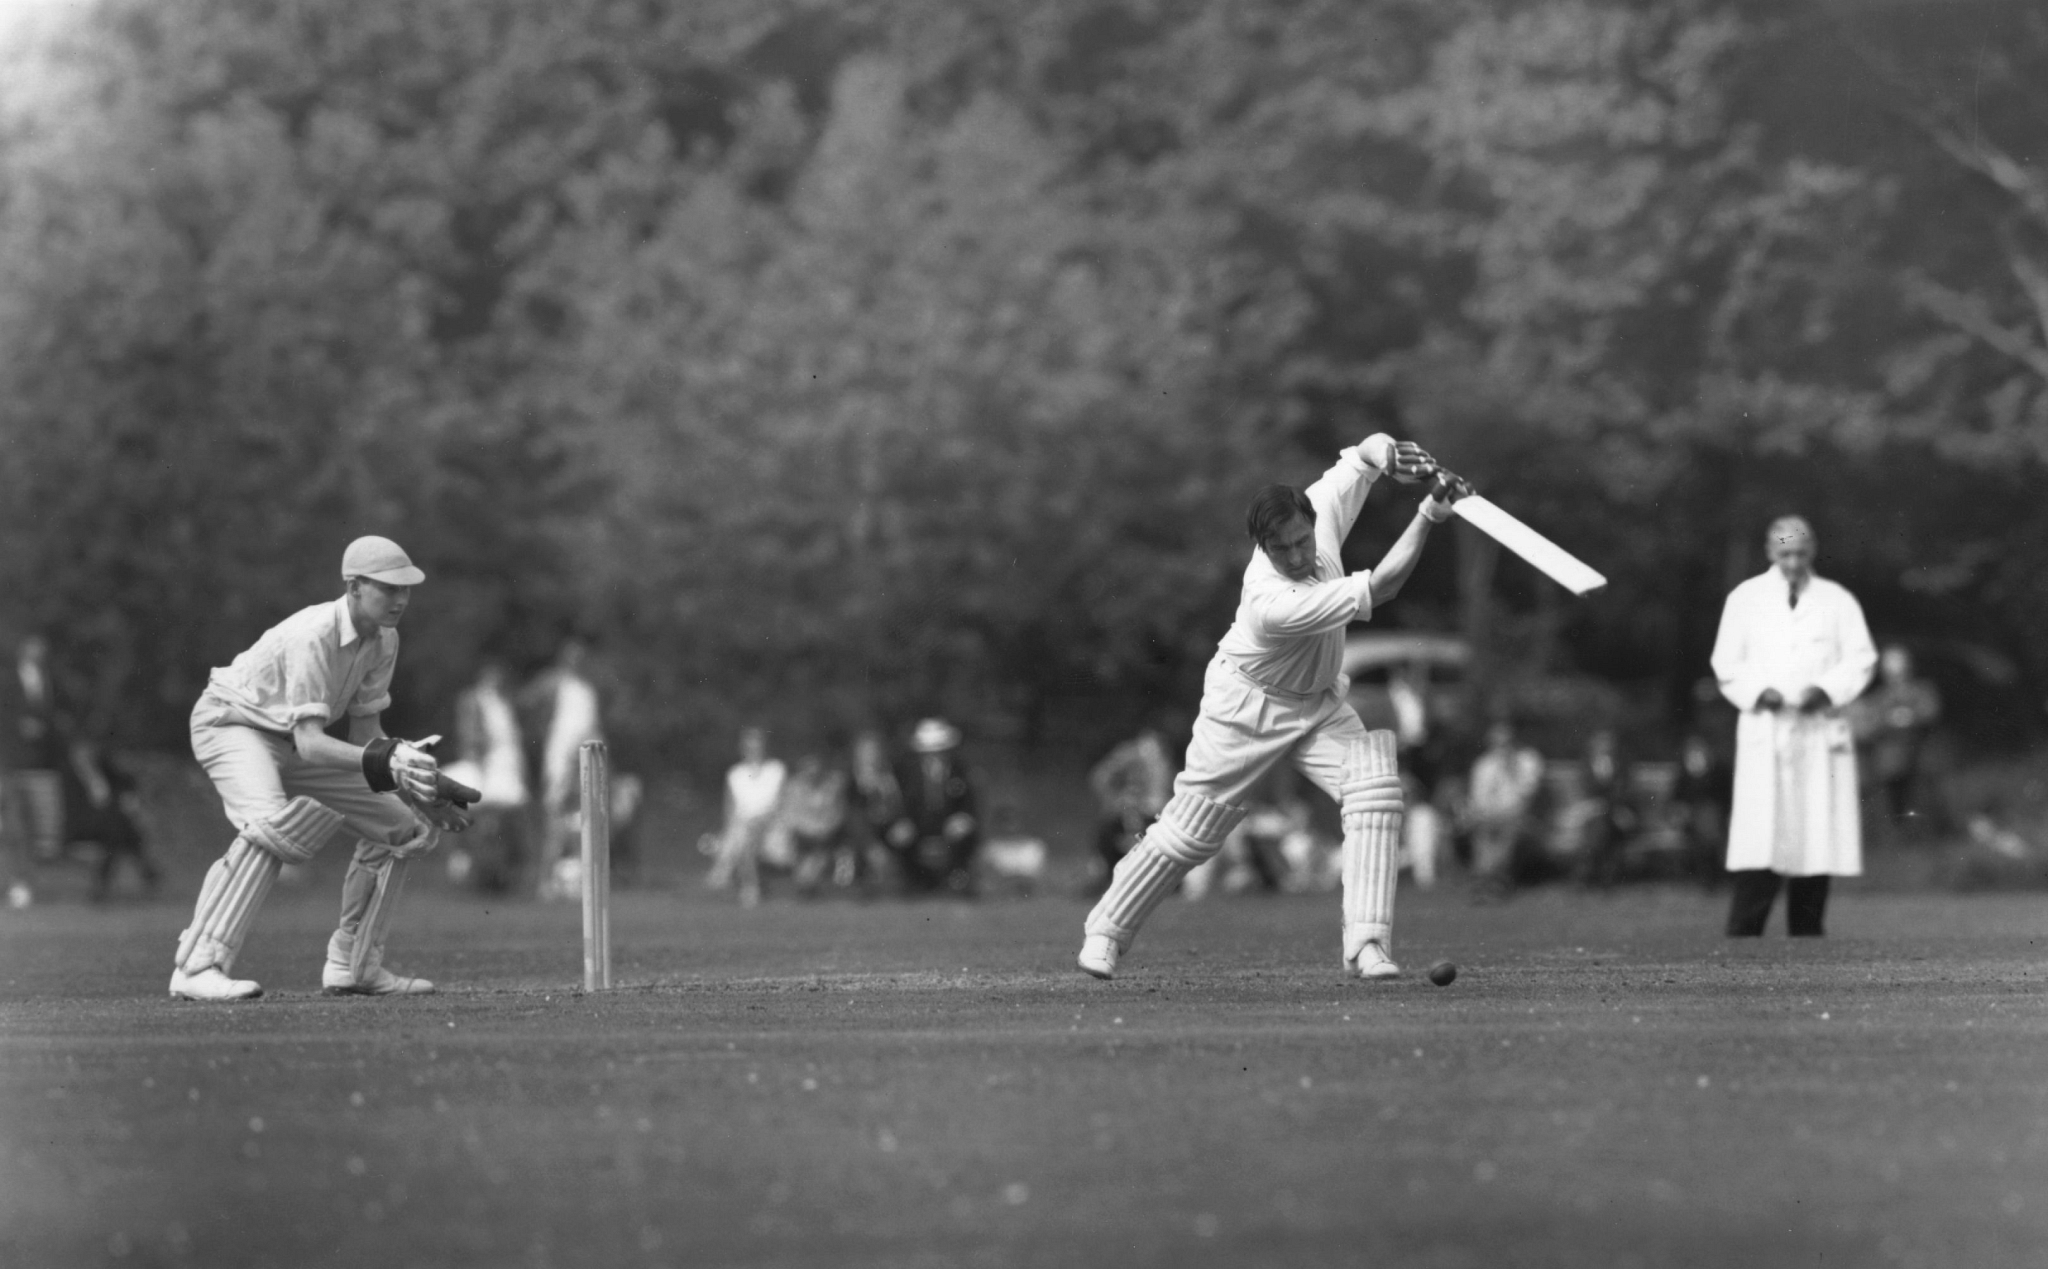 Representative Image. [A Test cricket match in 1956 (Harrison/Getty Images)]